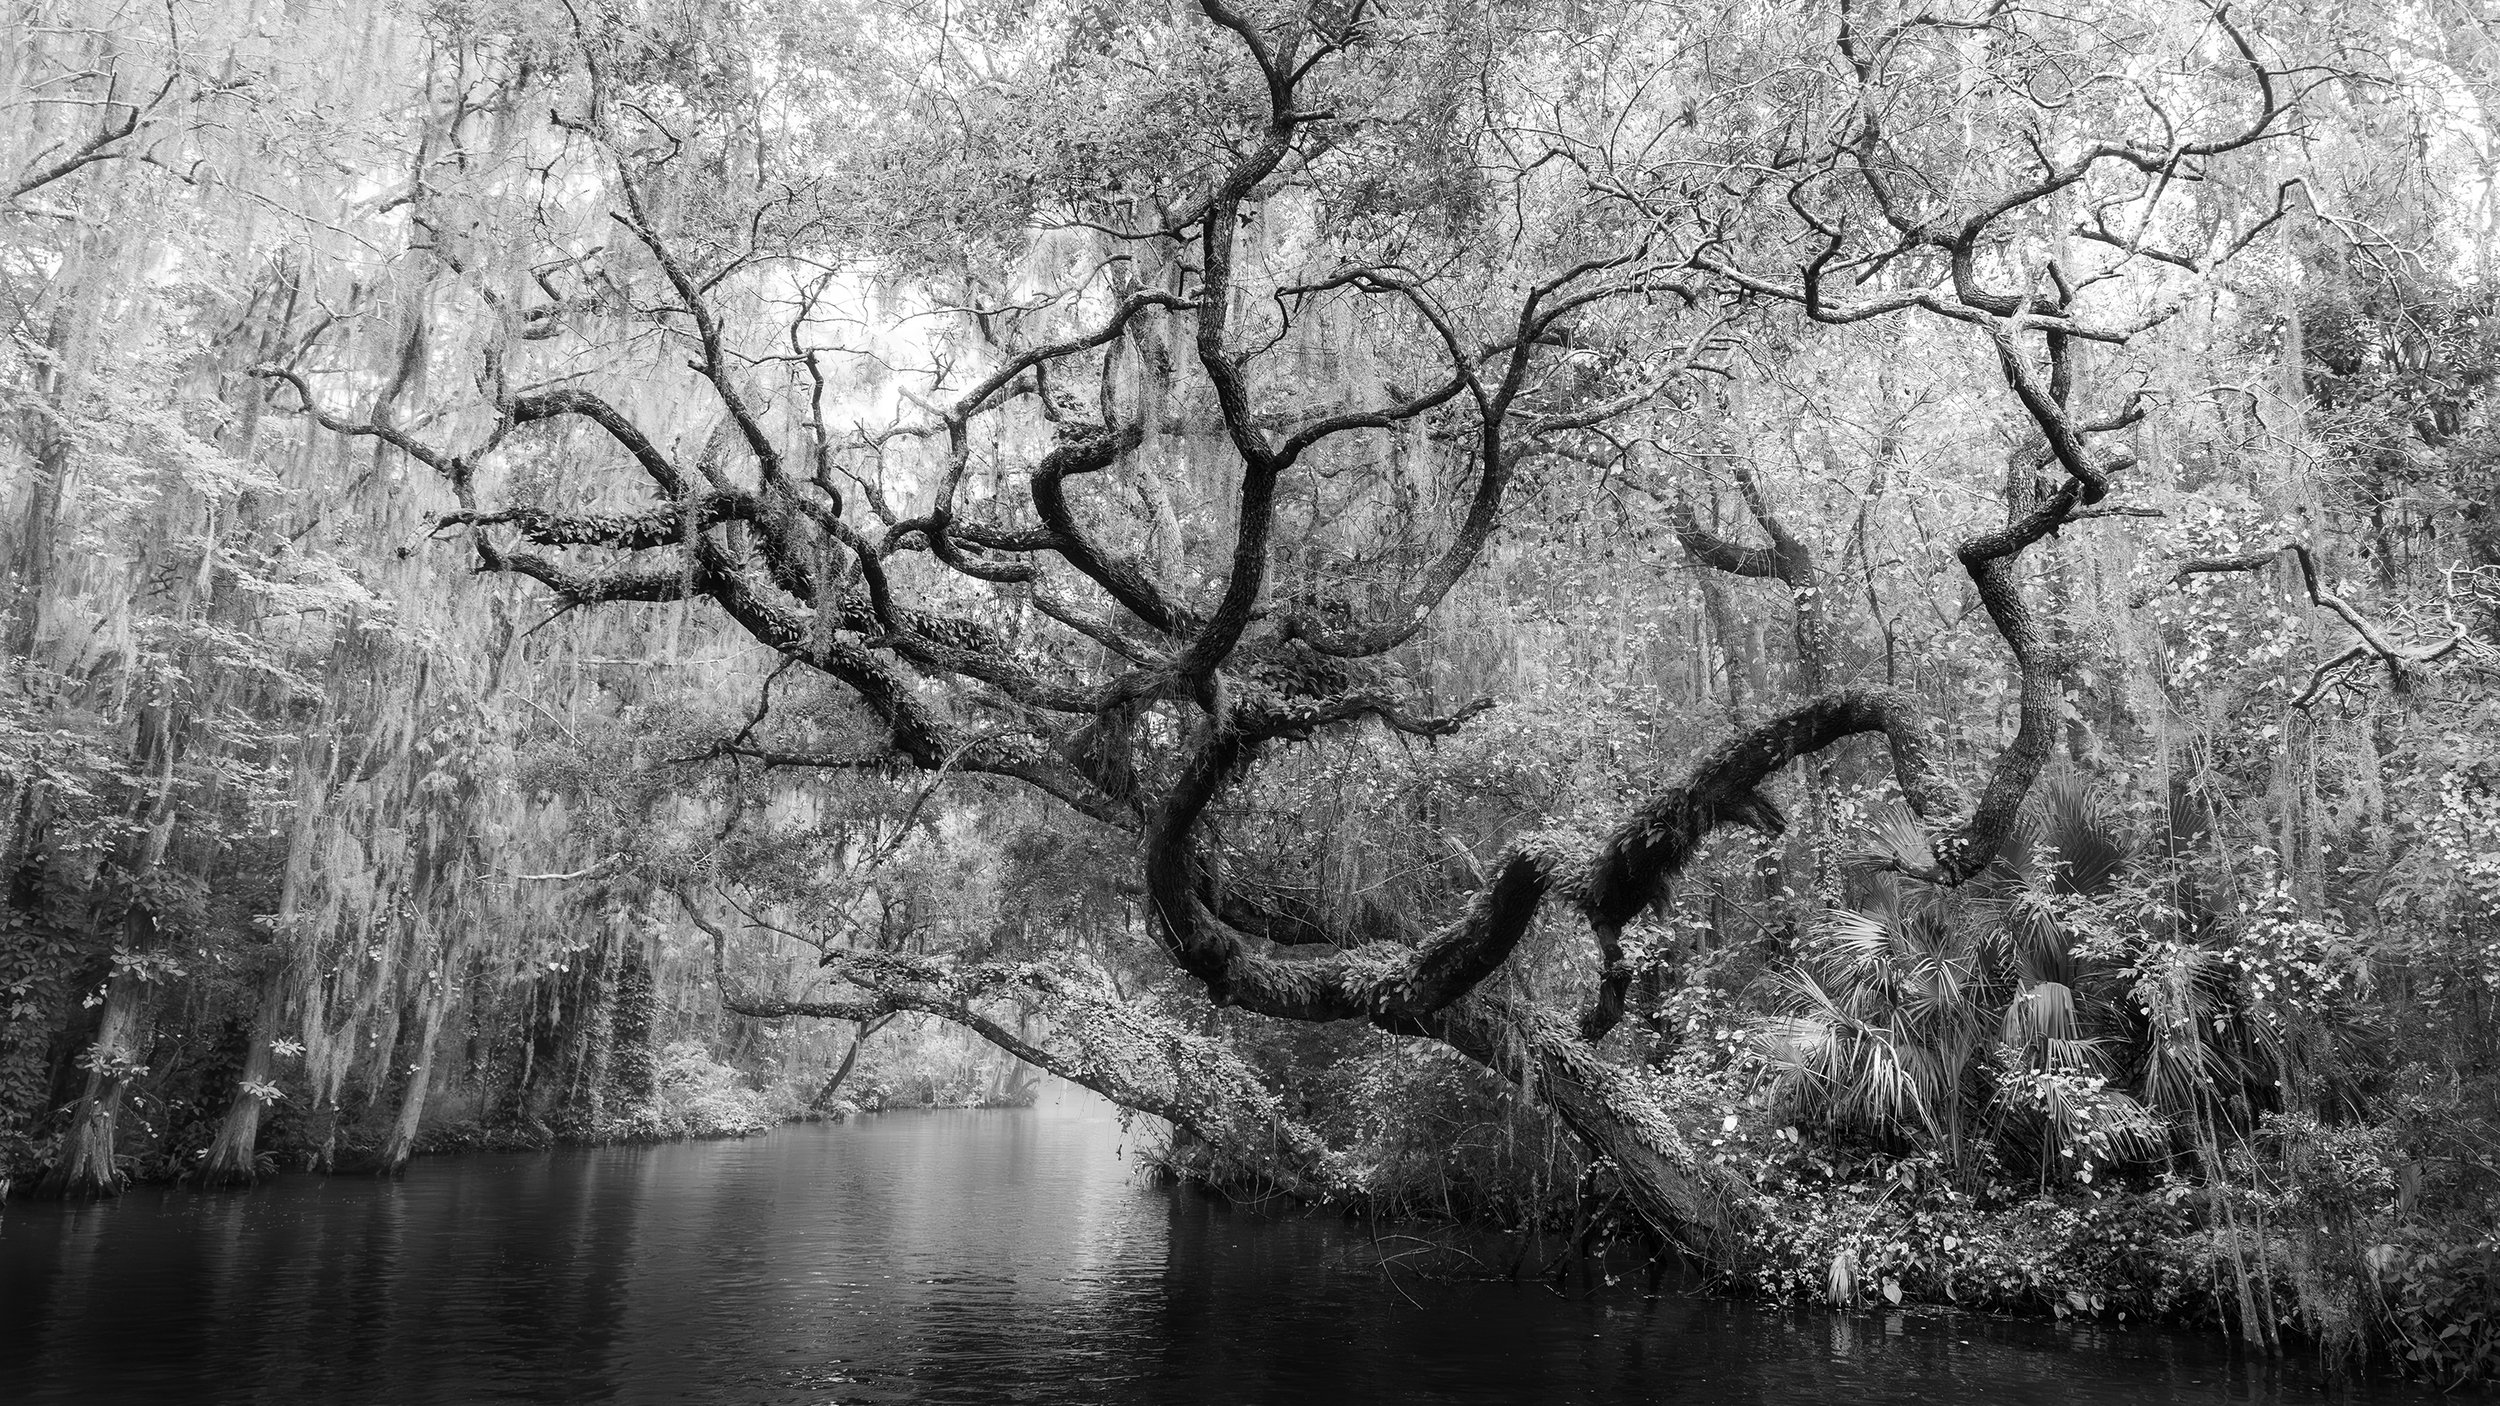  An old oak reaching out over the canal 